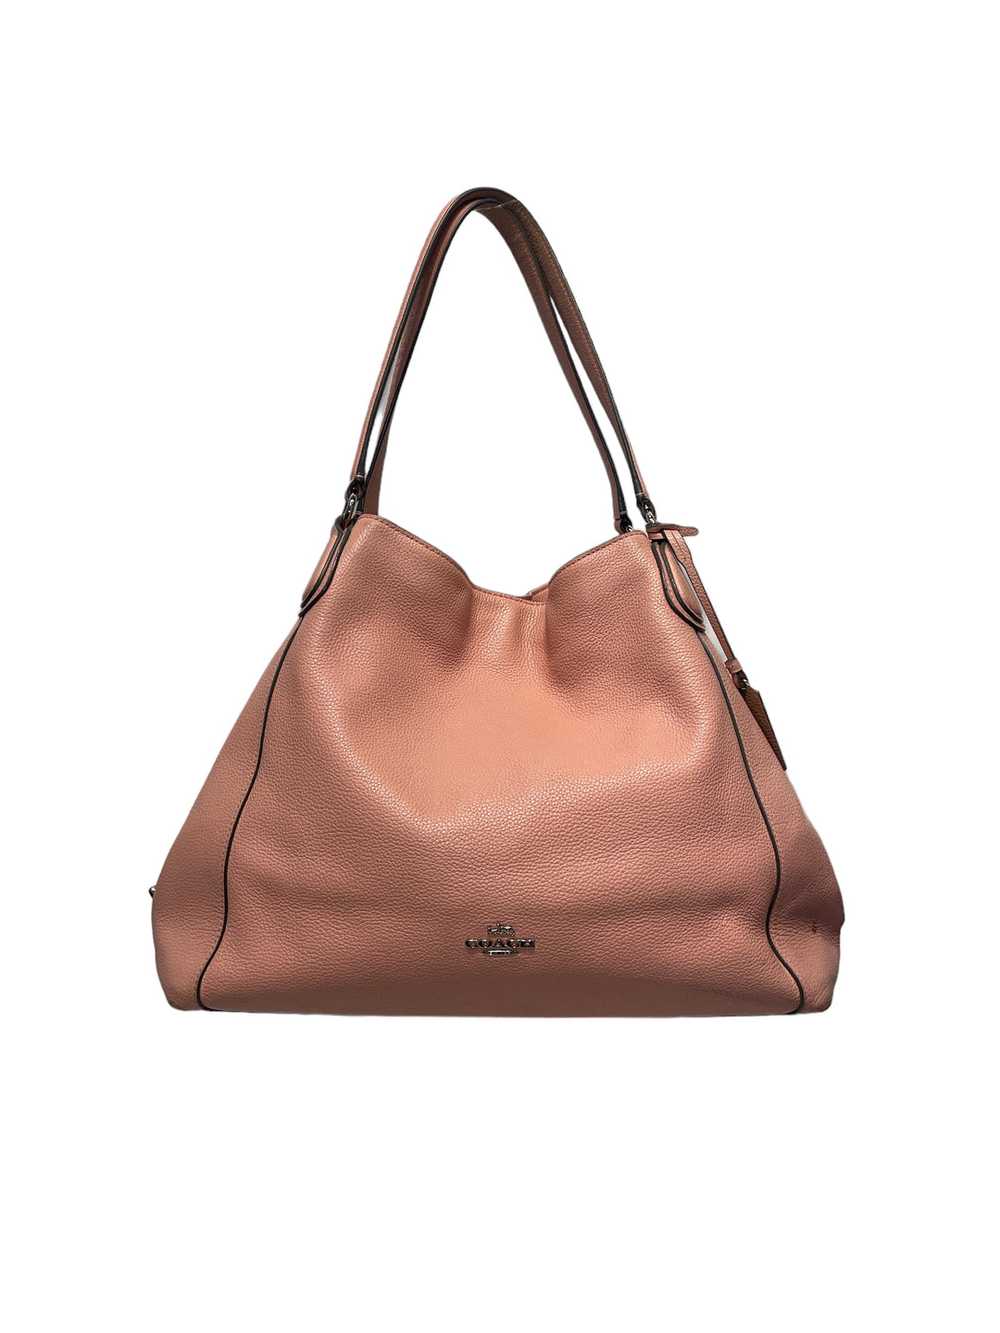 COACH/Tote Bag/Leather/PNK/ - image 1